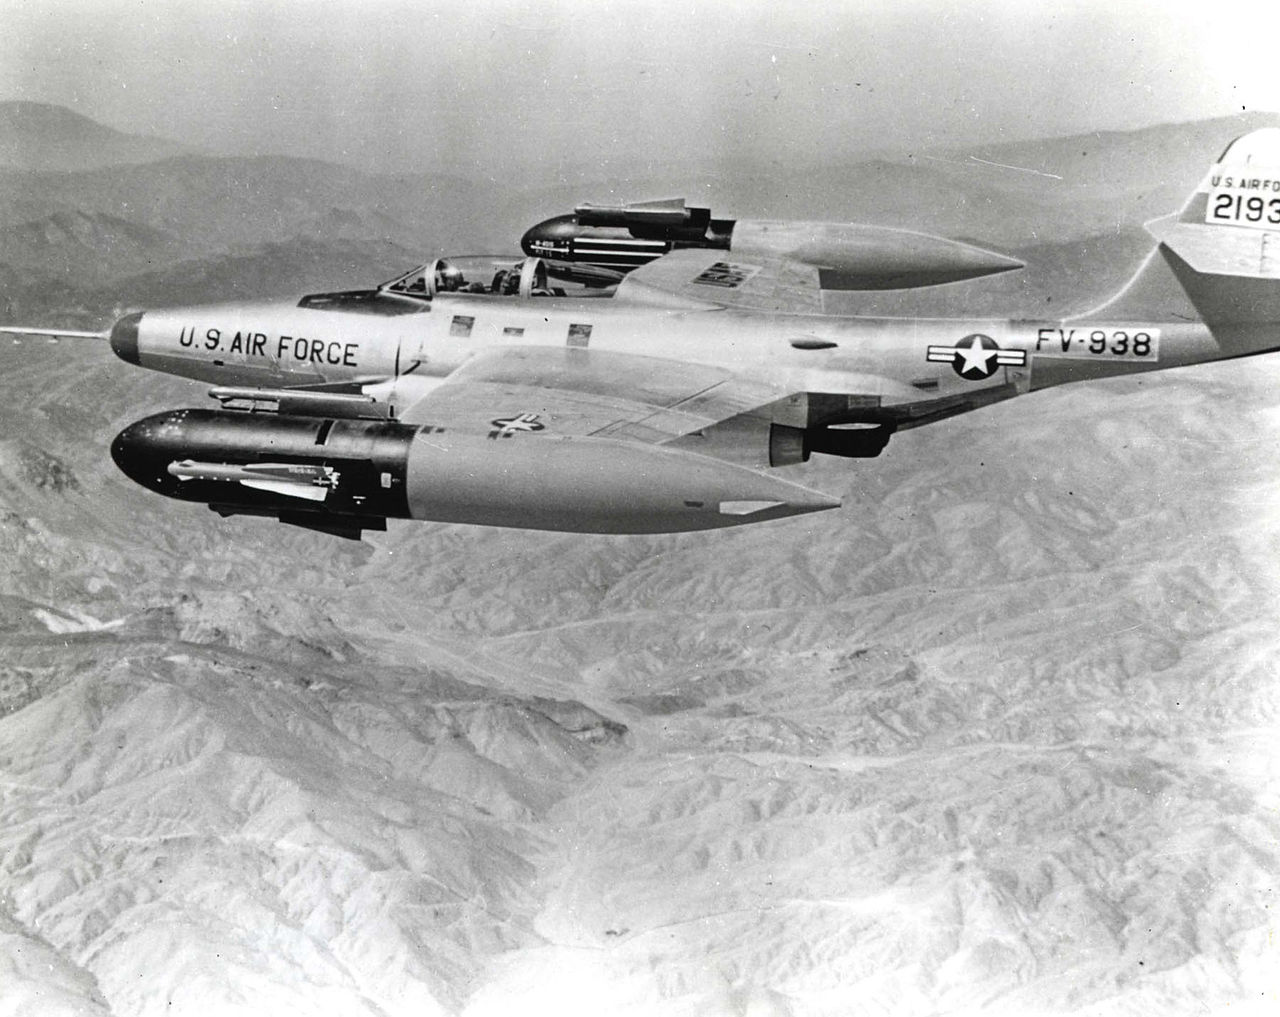 1280px-Northrop_F-89H_with_AIM-4_Falcon_missiles.jpg